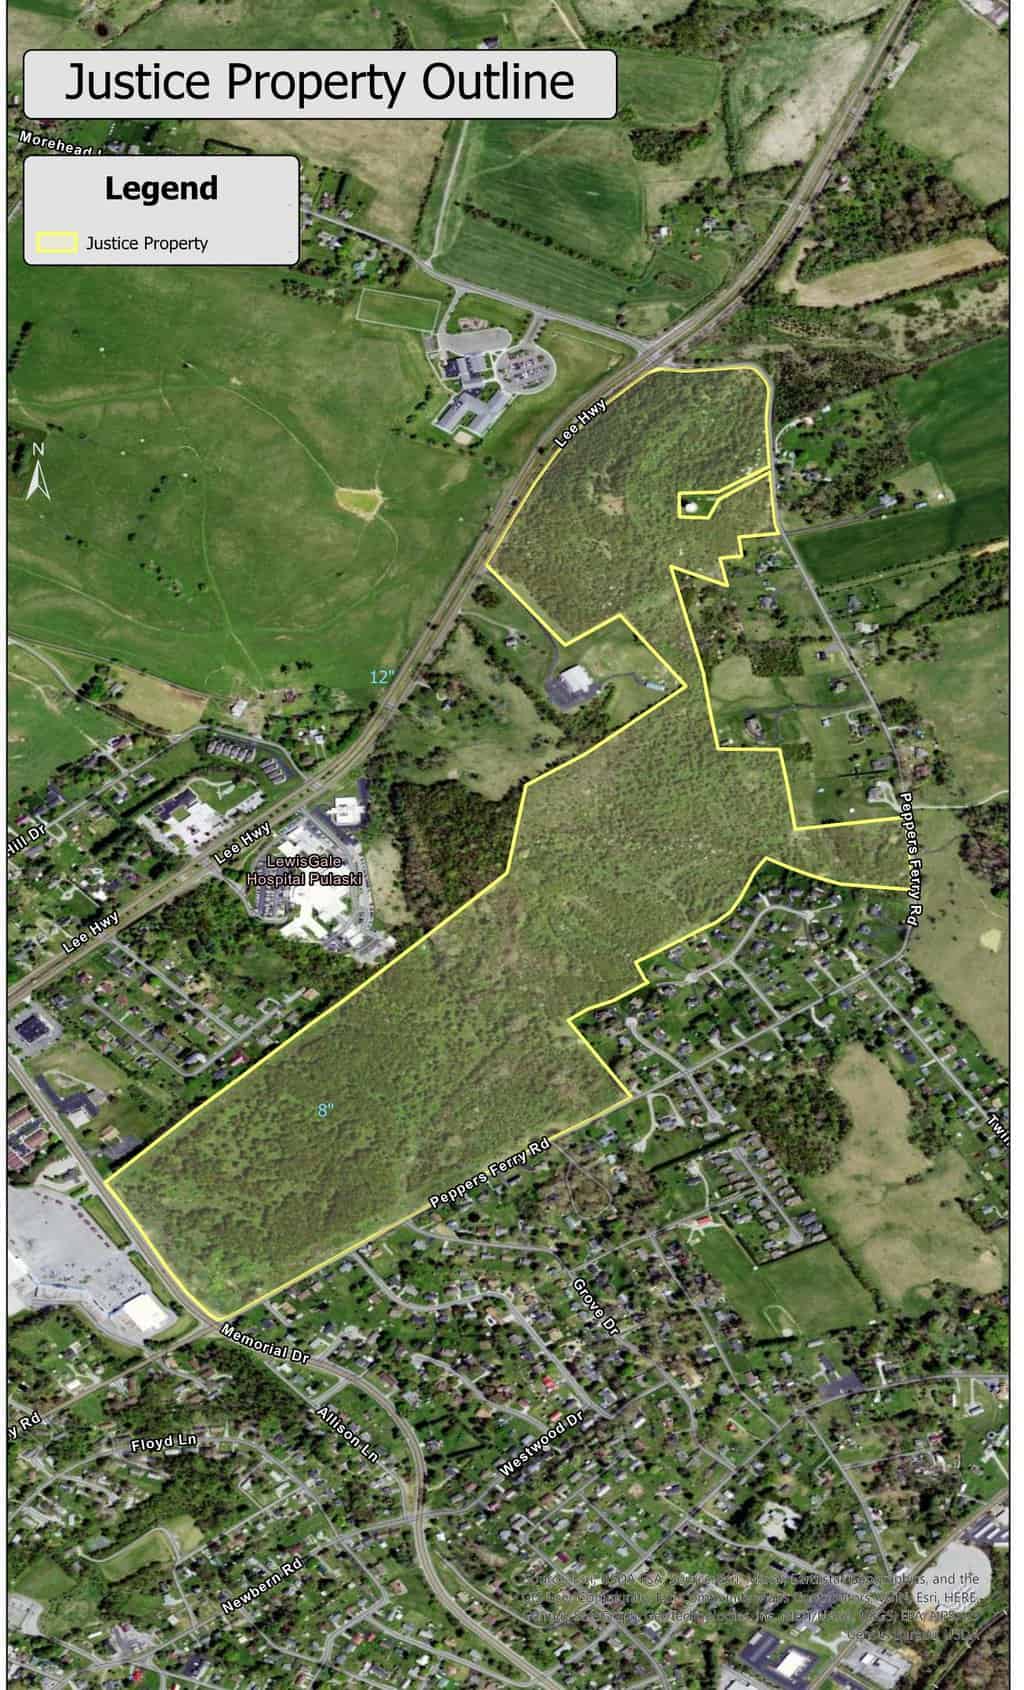 Justice Property – 155 Acres: The area outlined in yellow represents the 155-acre tract of undeveloped land purchased by the Town of Pulaski in December 2023. The former owner of this property was West Virginia Governor Jim Justice. Courtesy of Town of Pulaski